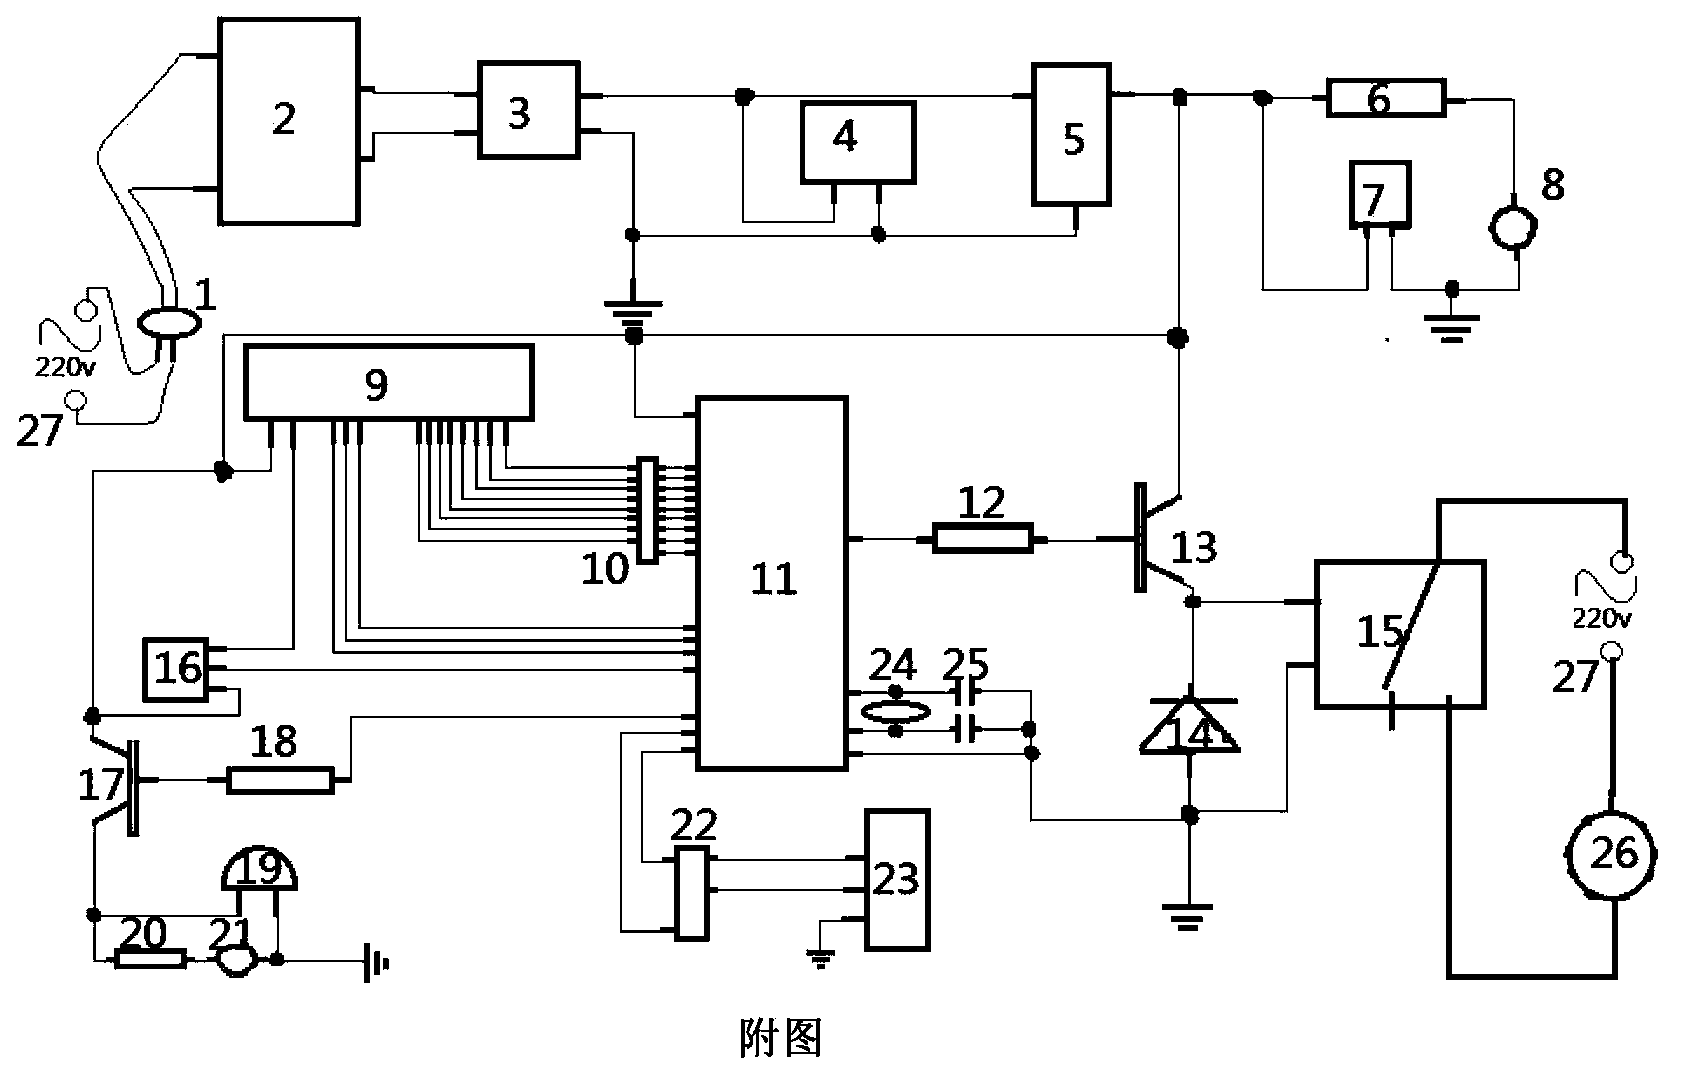 Main chip circuit control module for temperature real-time monitoring alarm control system